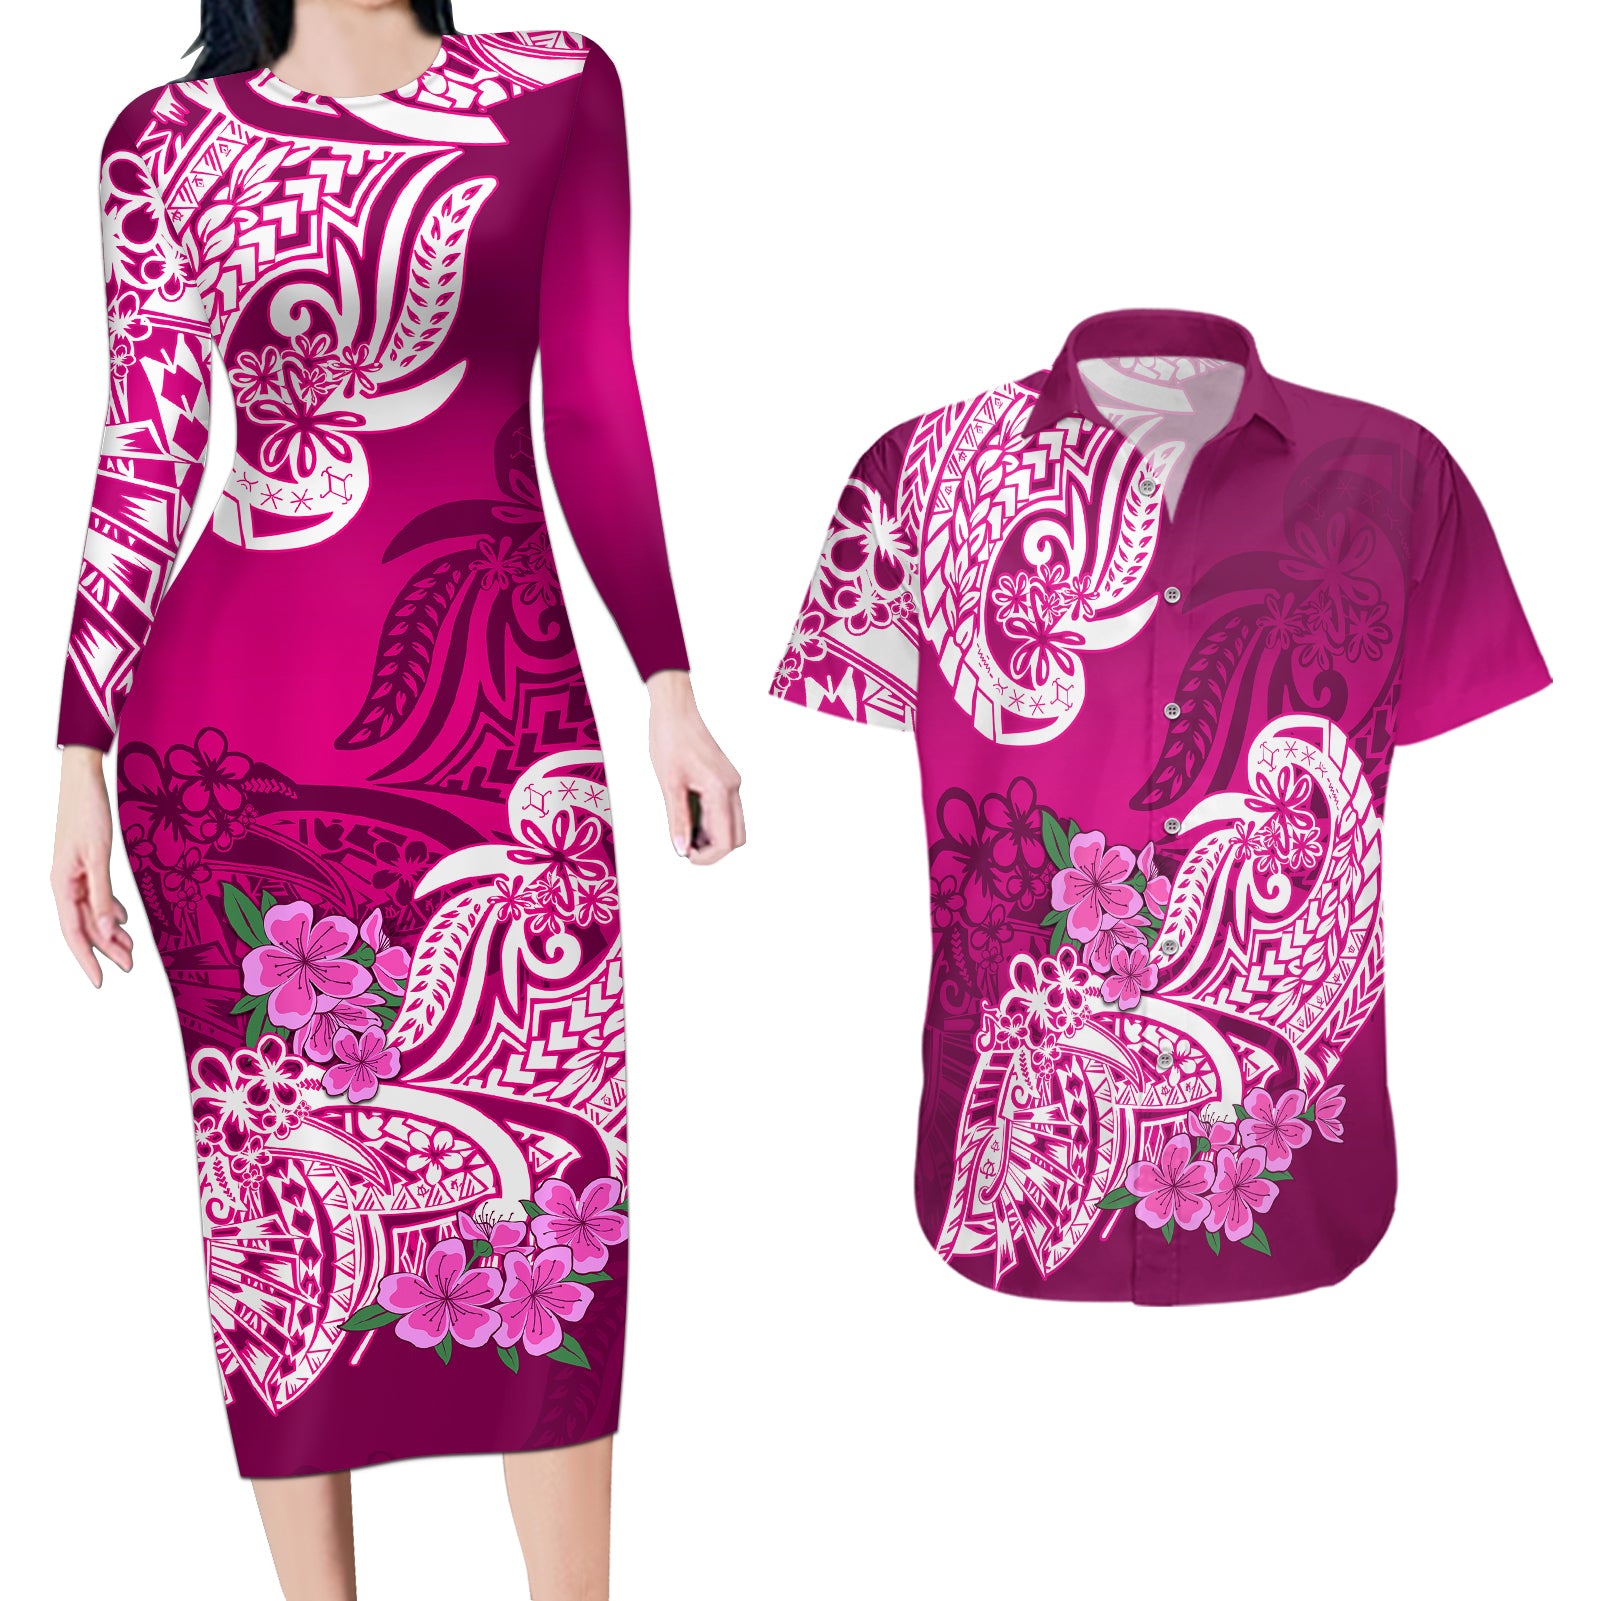 Polynesian Couples Matching Long Sleeve Bodycon Dress and Hawaiian Shirt Pacific Flower Mix Floral Tribal Tattoo Pink Vibe LT9 Pink - Polynesian Pride